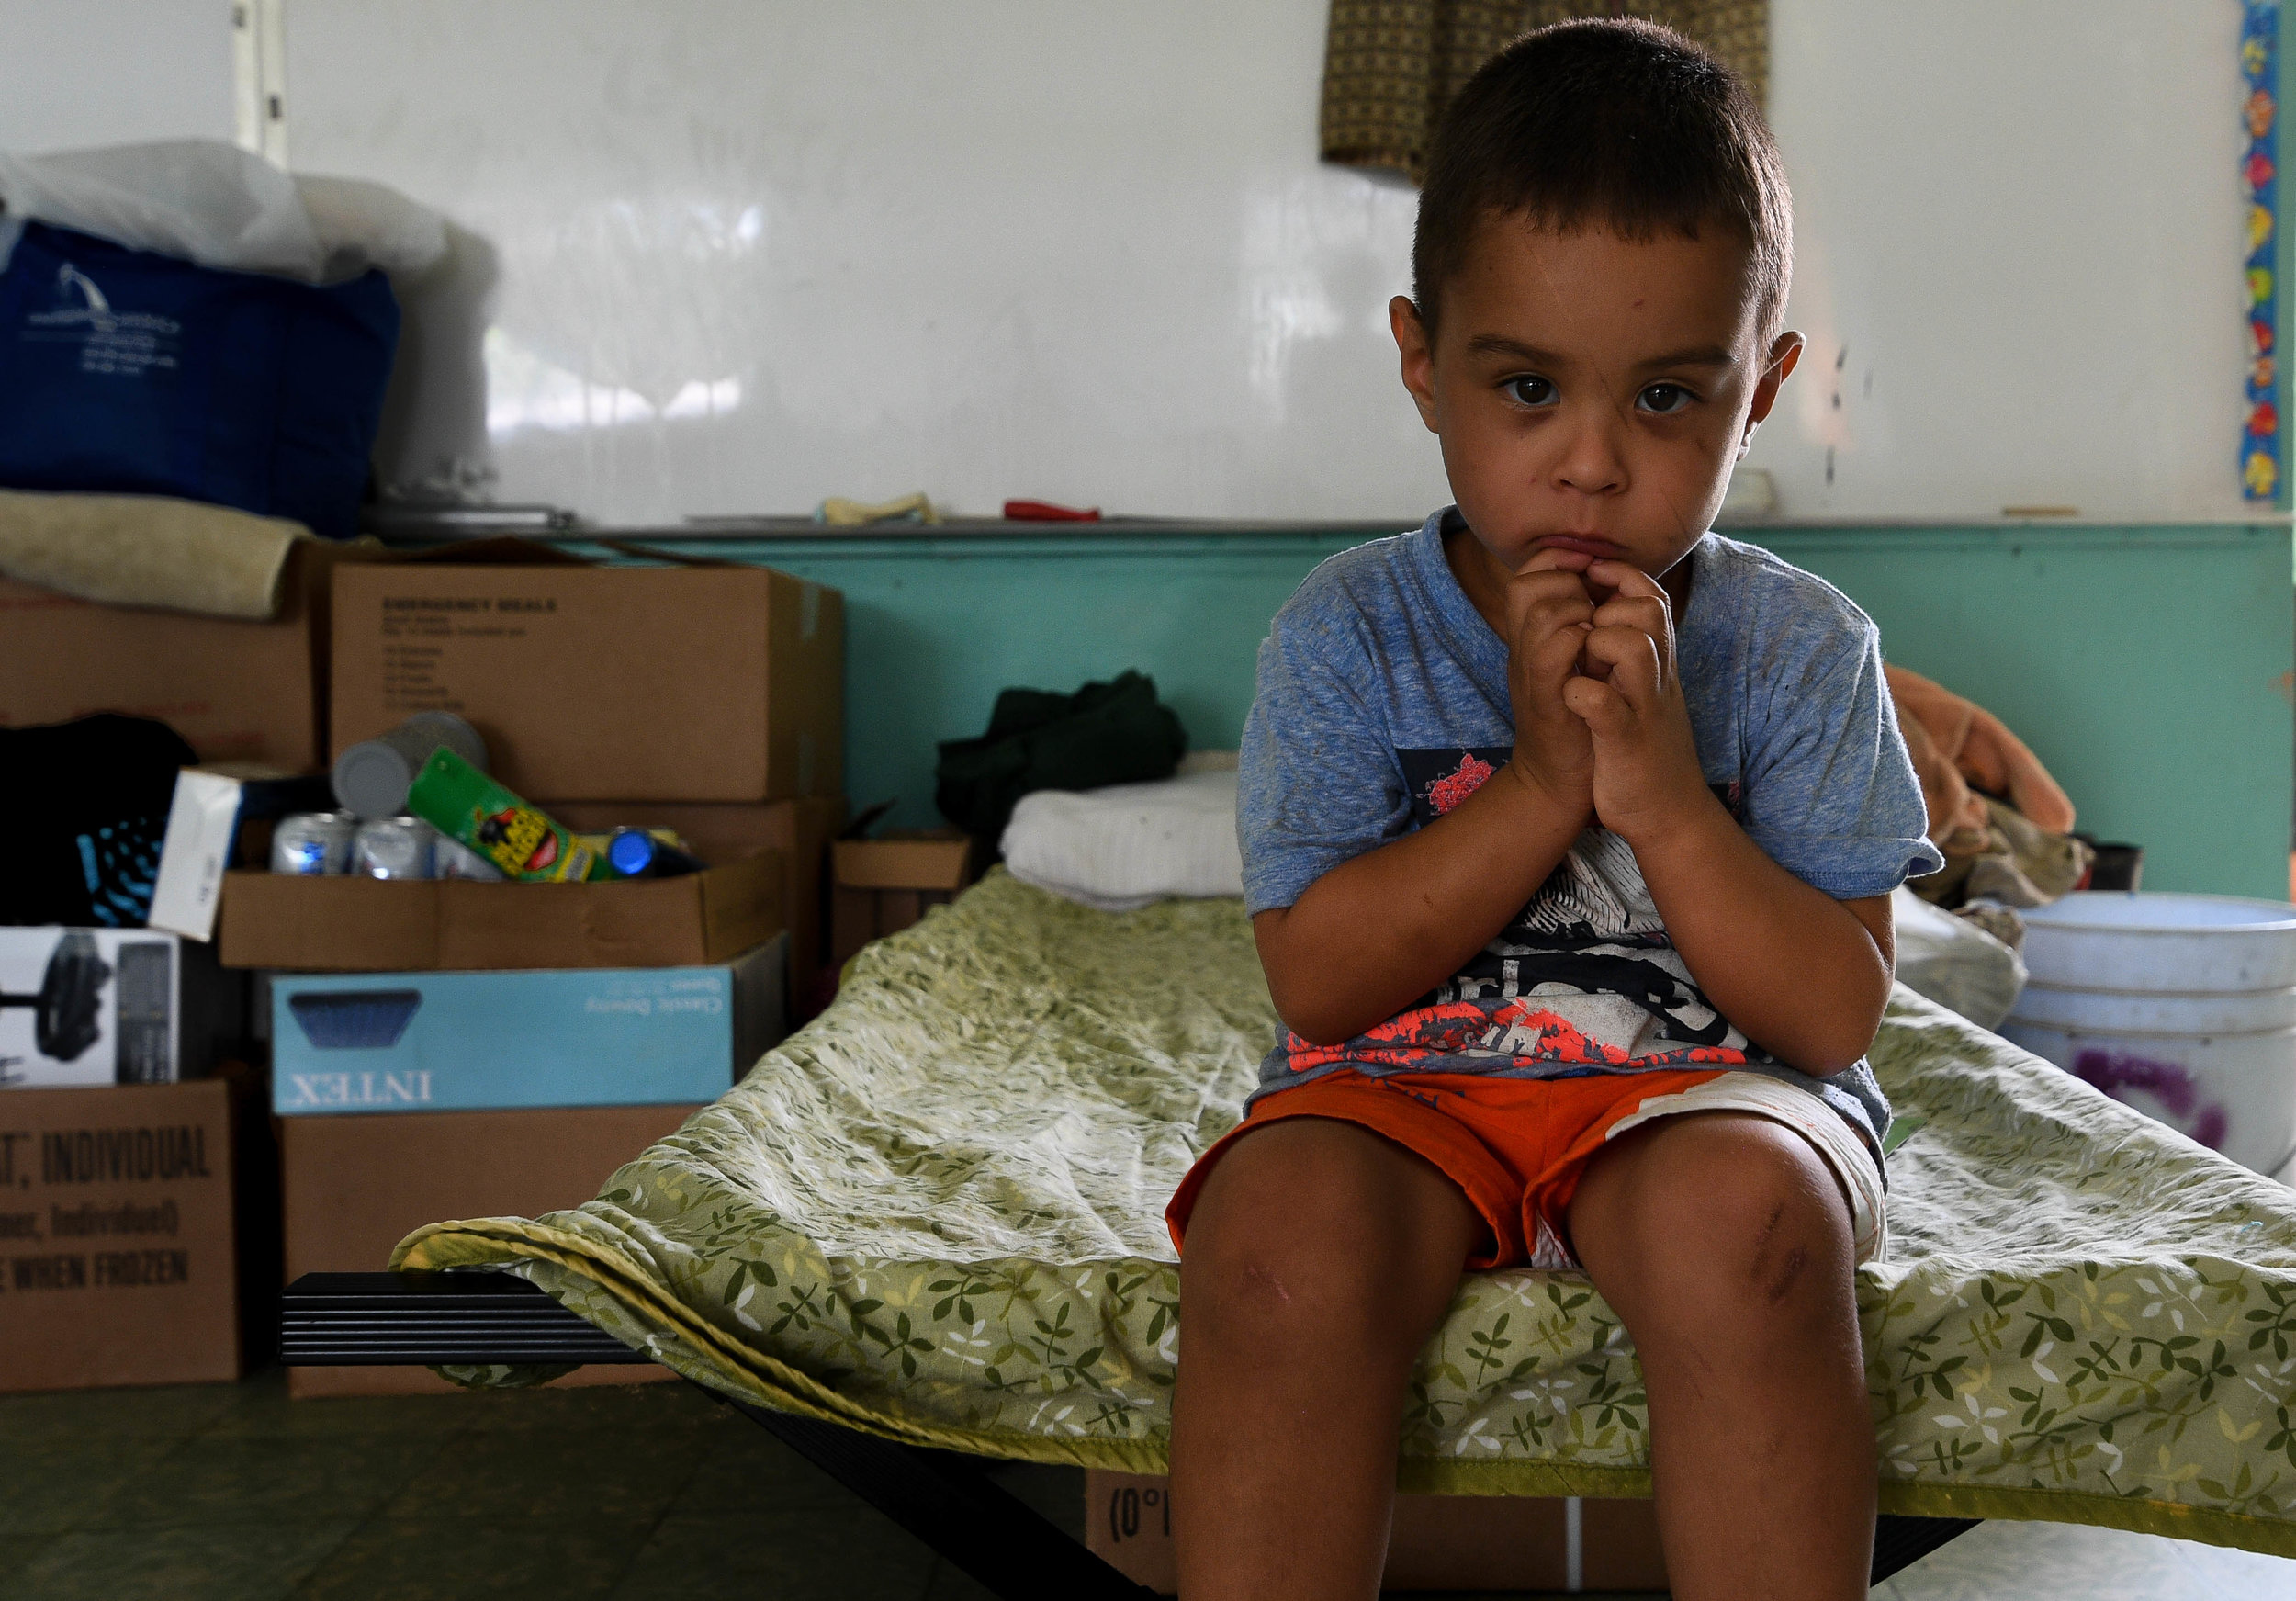    EXPAND   Five-year-old Jeyden Quinones isn't used to the food the military has given him. He wants plantains, his favorite food. Over the past few months, he and eight family members have been sharing one room and four beds in the cramped Jayuya s